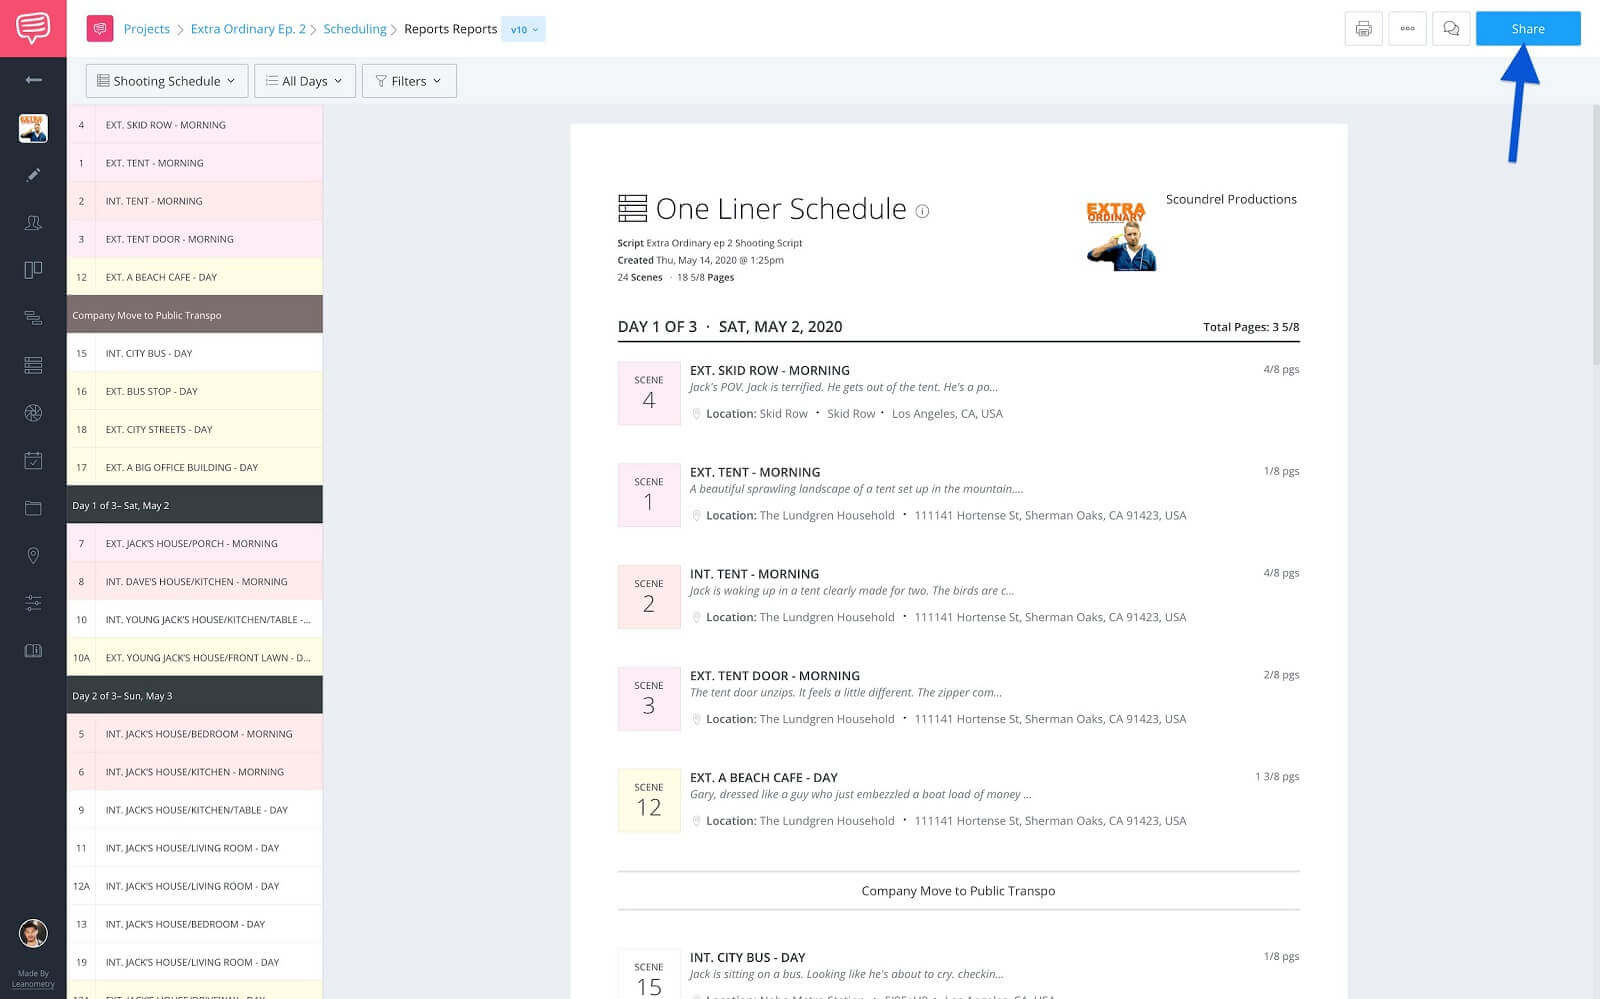 Sharing one-liner schedule - Click share button